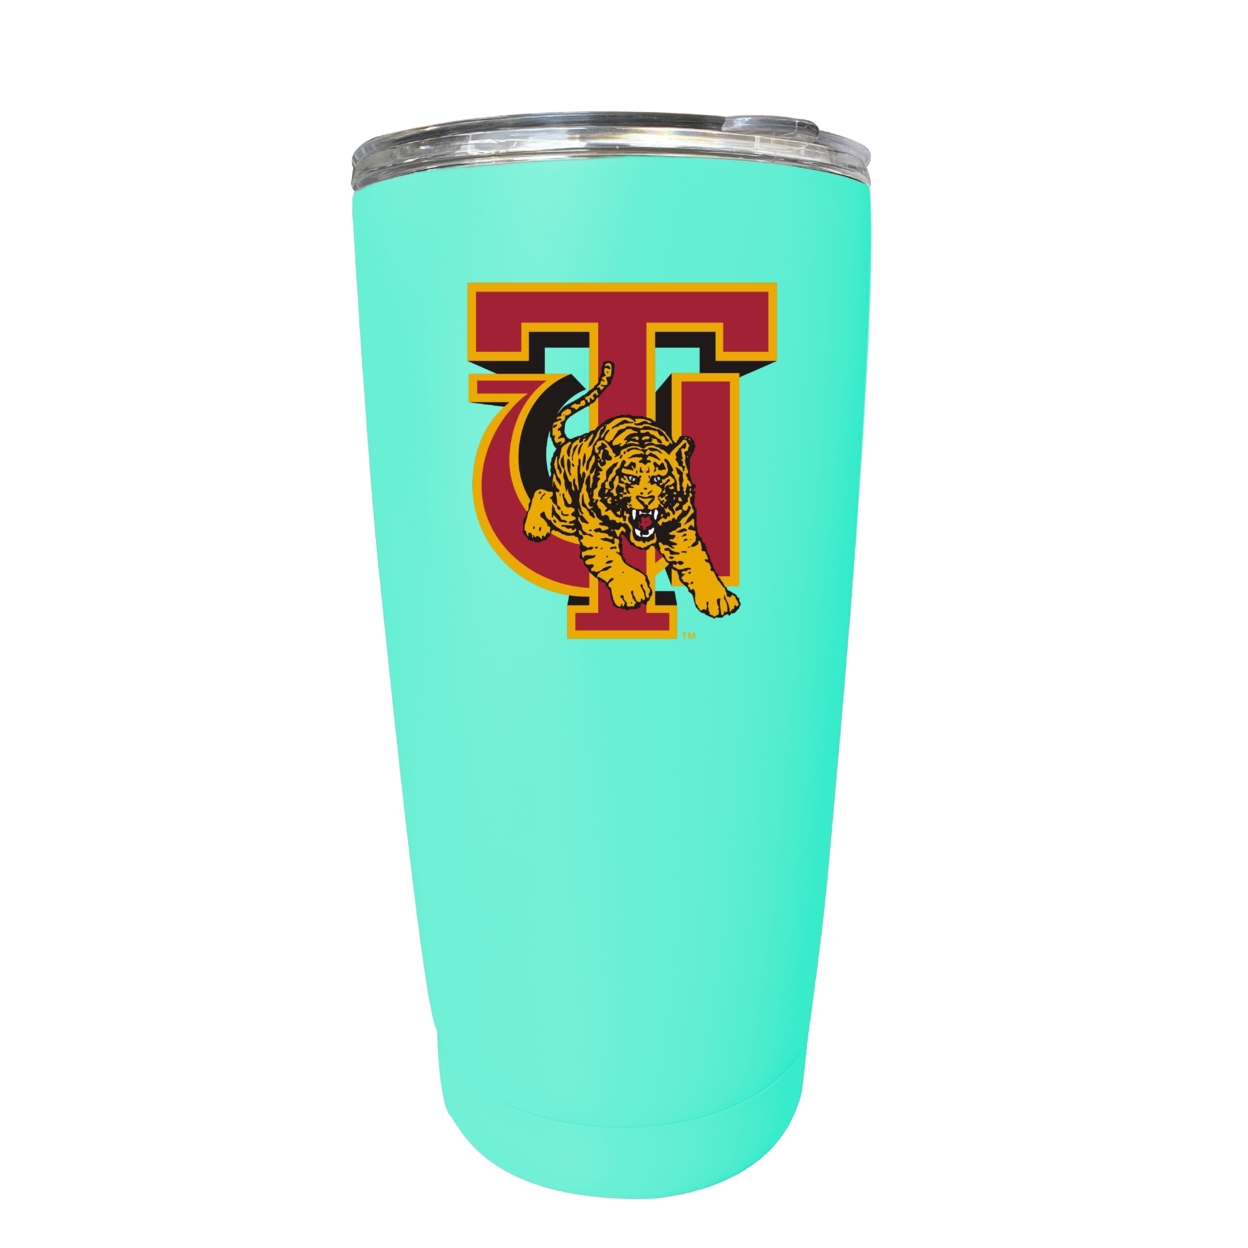 Tuskegee University 16 Oz Insulated Stainless Steel Tumbler - Choose Your Color. - Red